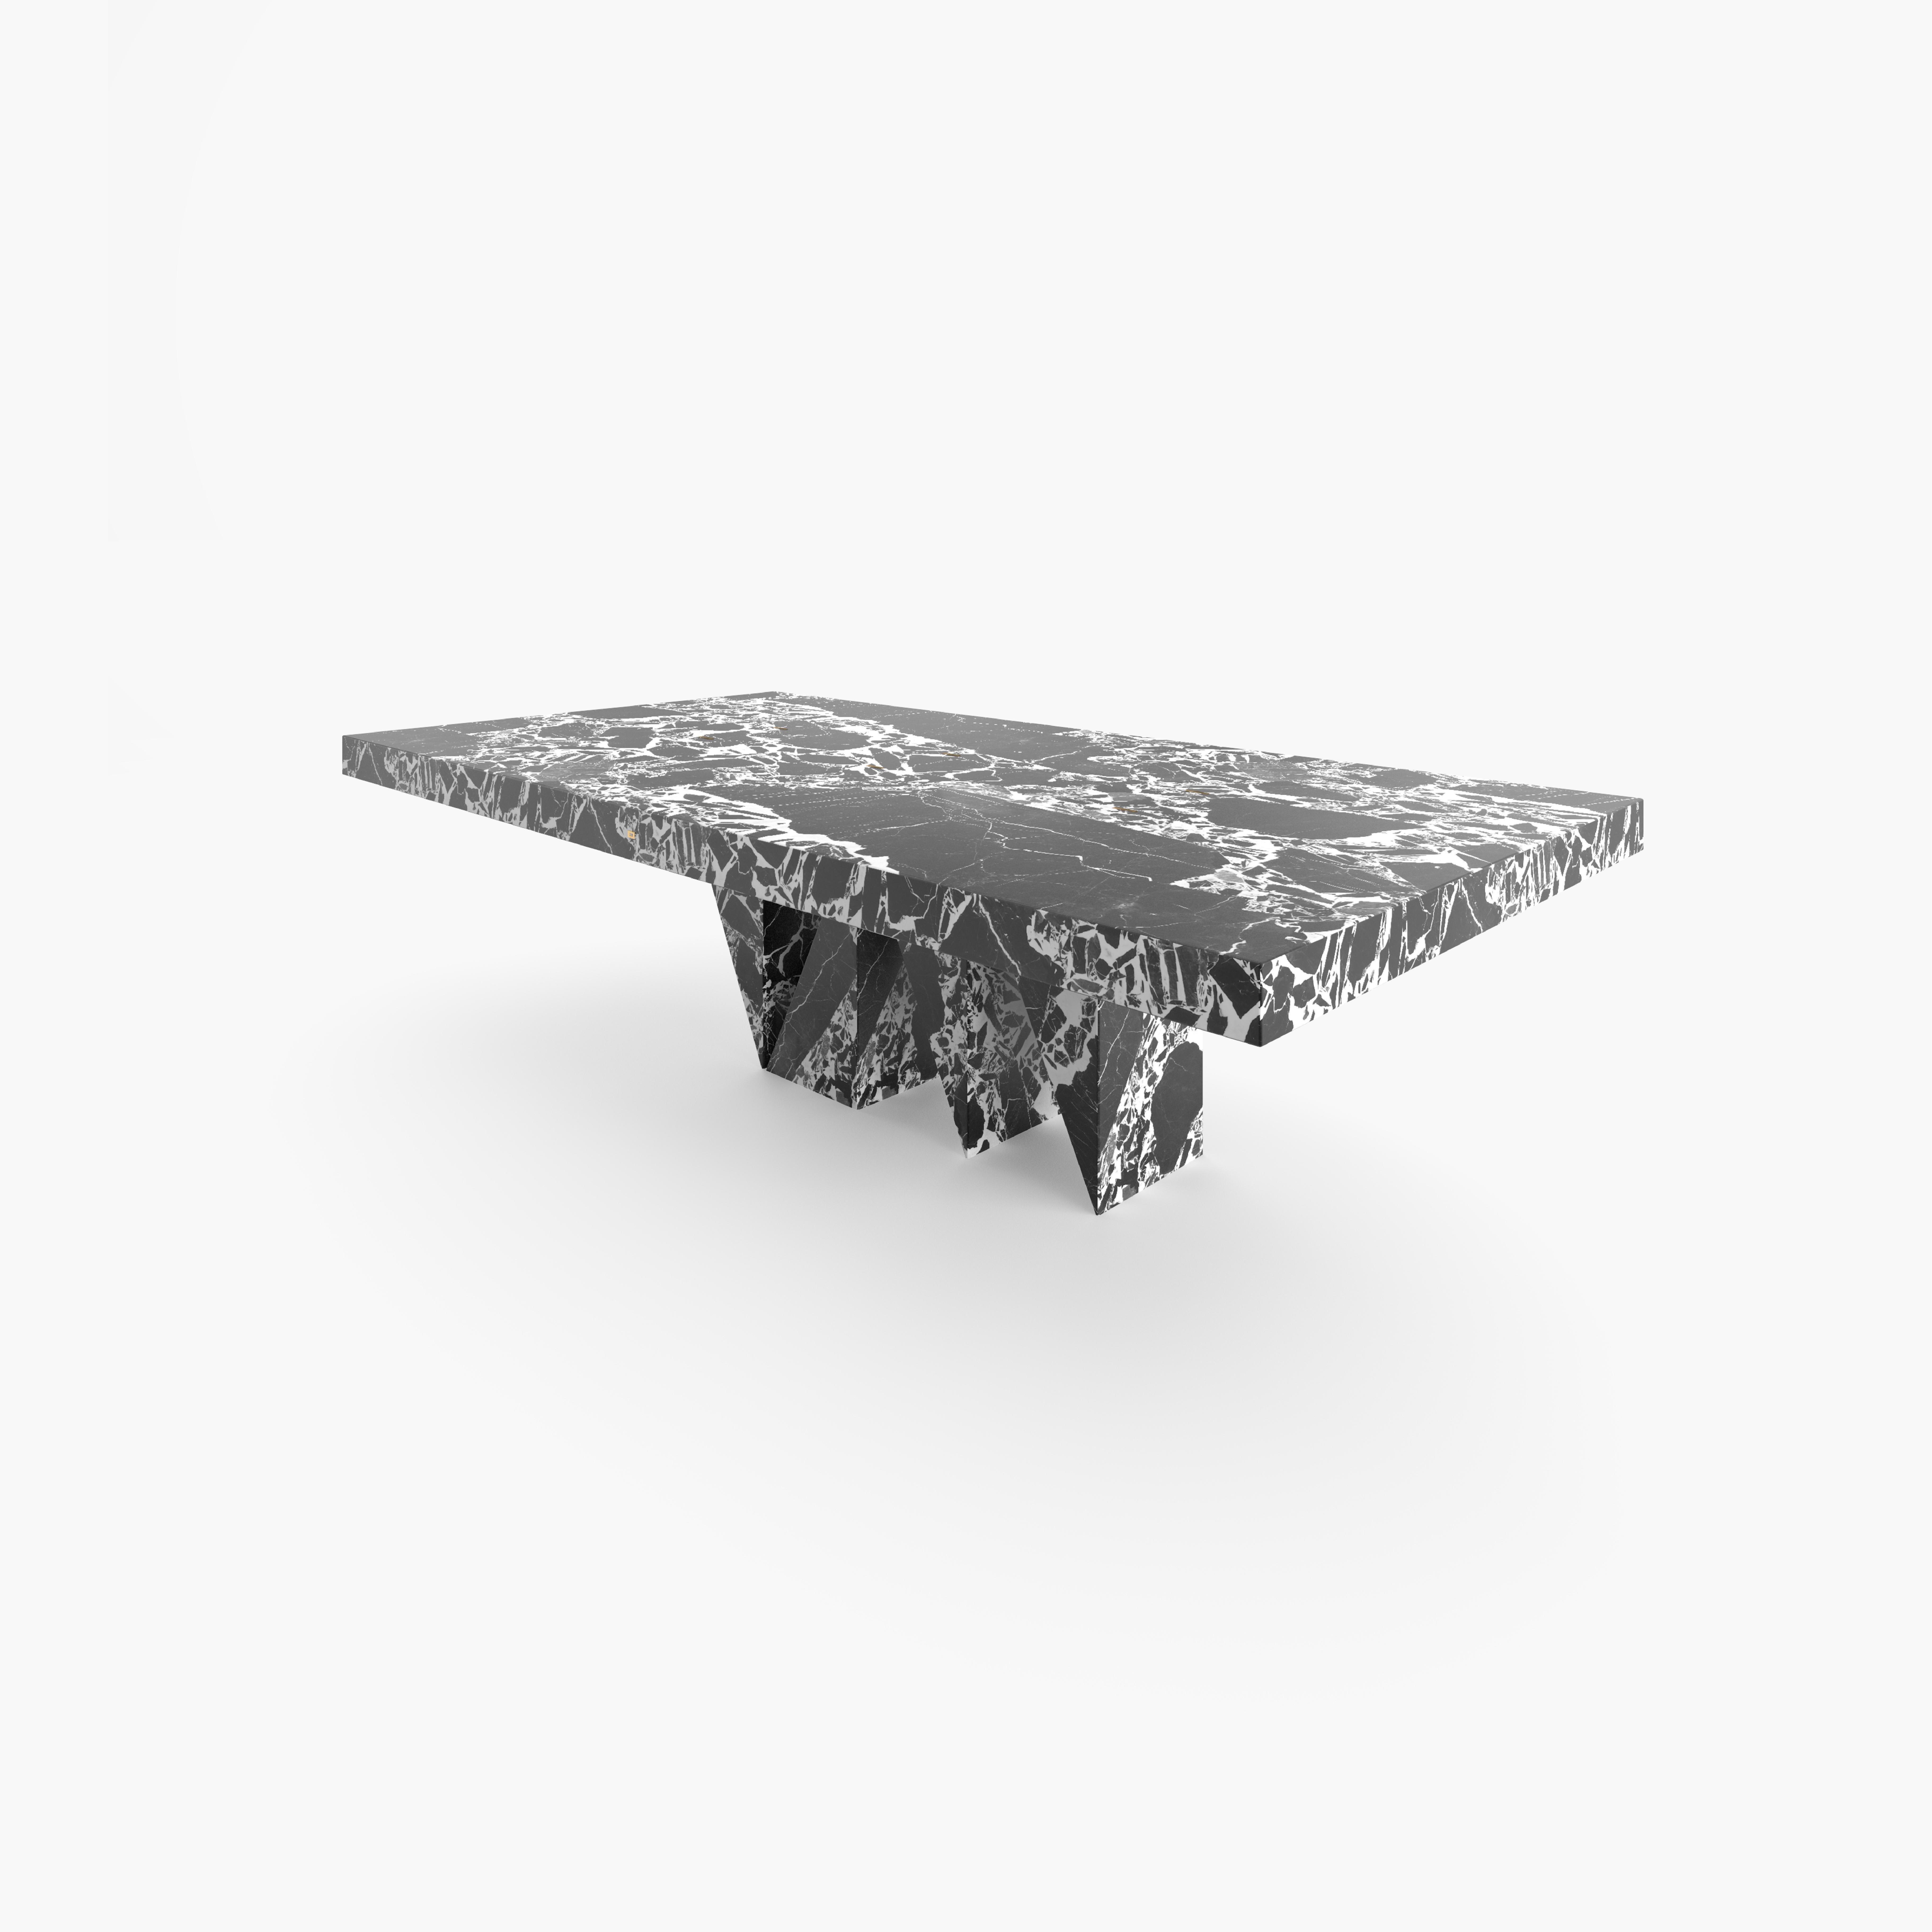 Dining-Table Black Marble 260x142x71cm Triangular Middle-Leg, Handcrafted, pc1/1 For Sale 1